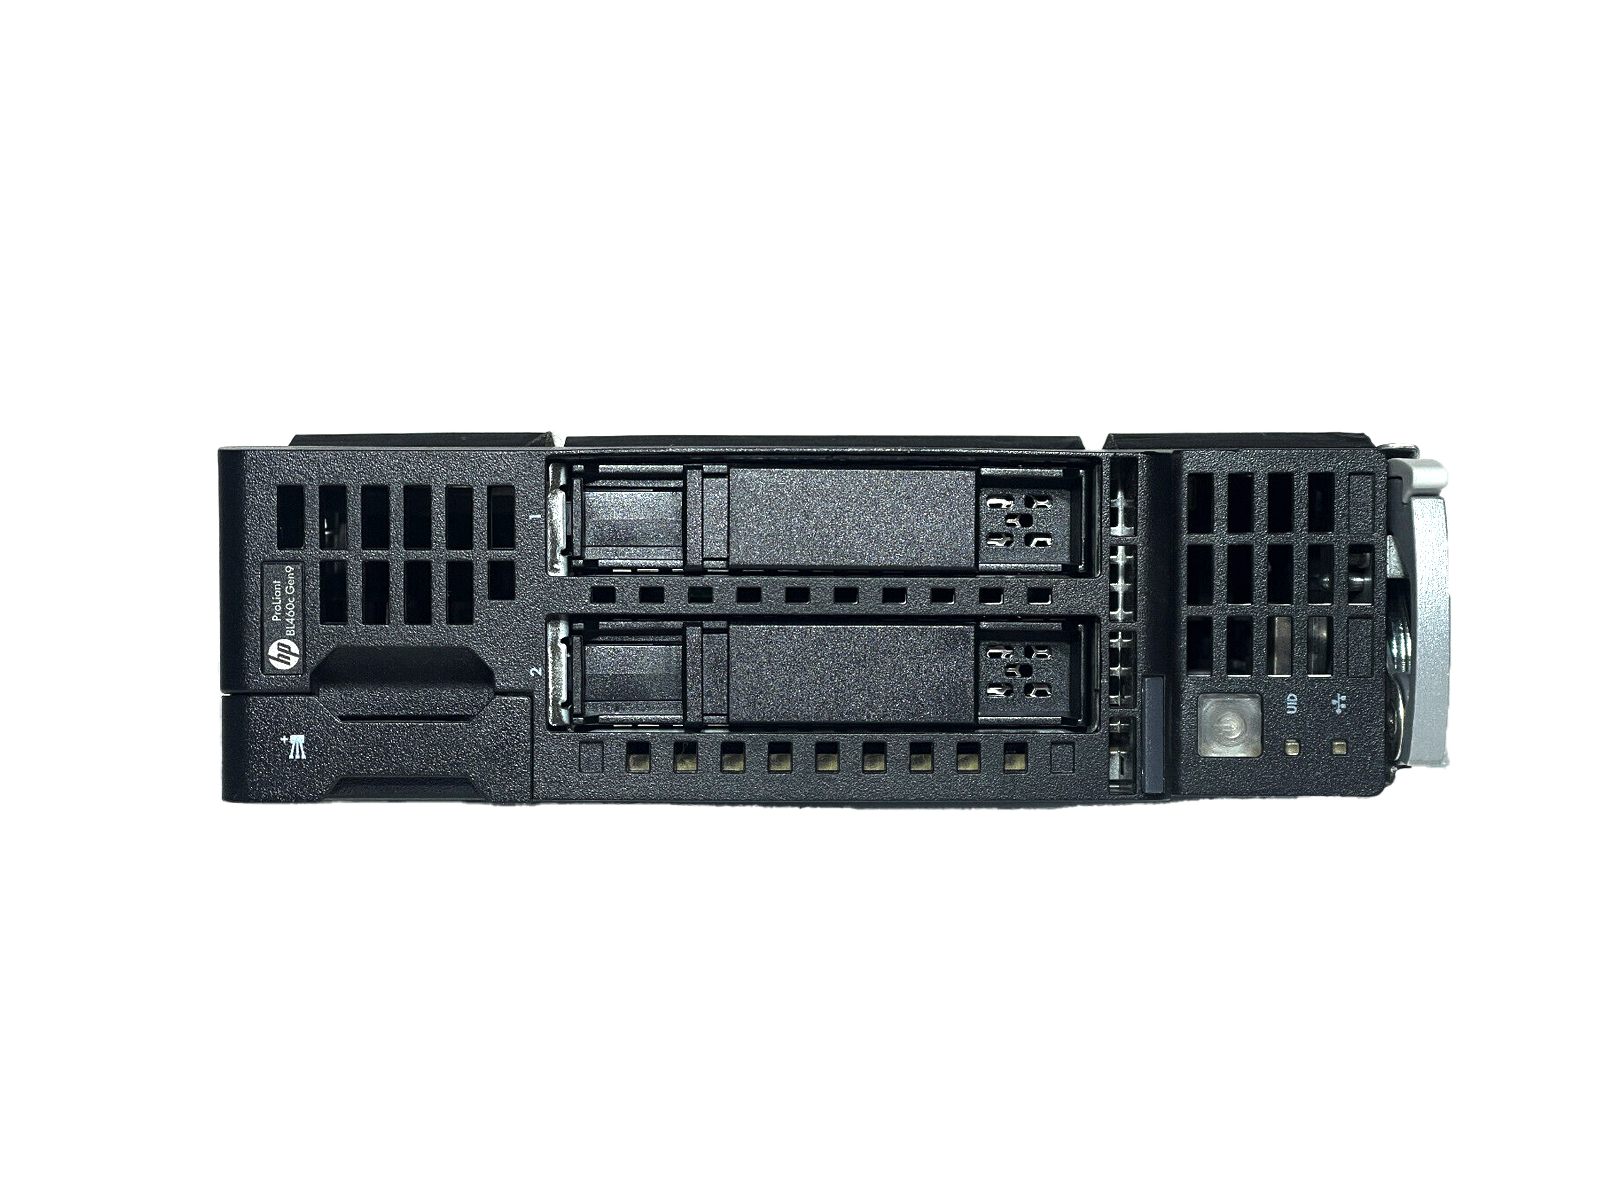 HPE 727021-B21 BL460c Gen9 Blade Server 2SFF 2x E5-2650v3 128GB P244br 630FLB 10GbУ